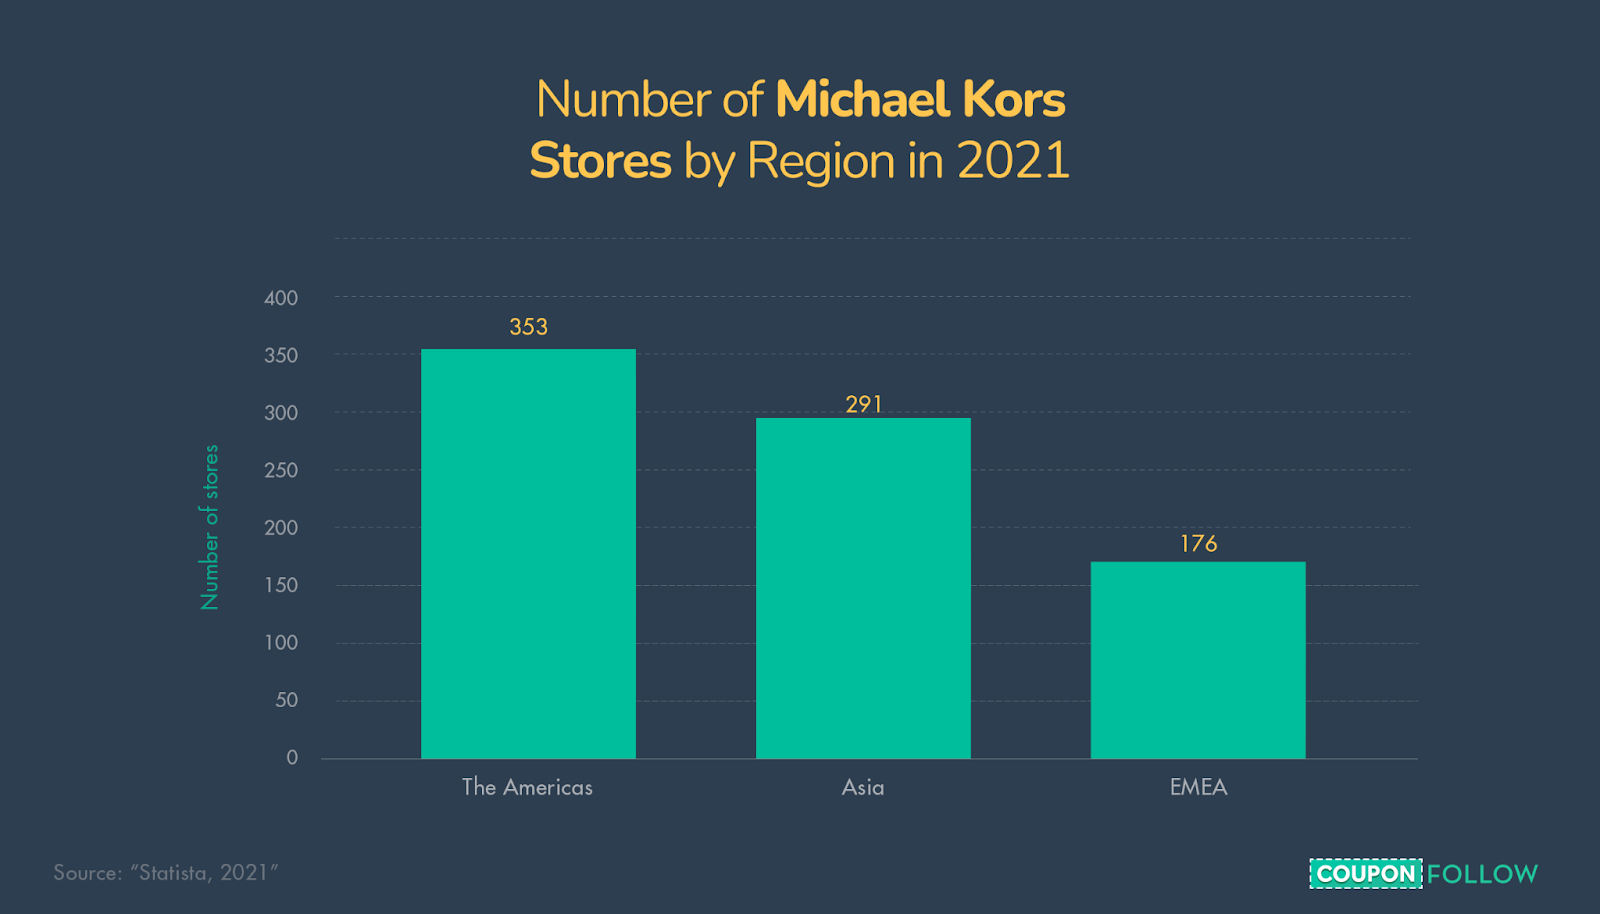 graph showing the number of Michael Kors stores worldwide by region in 2021